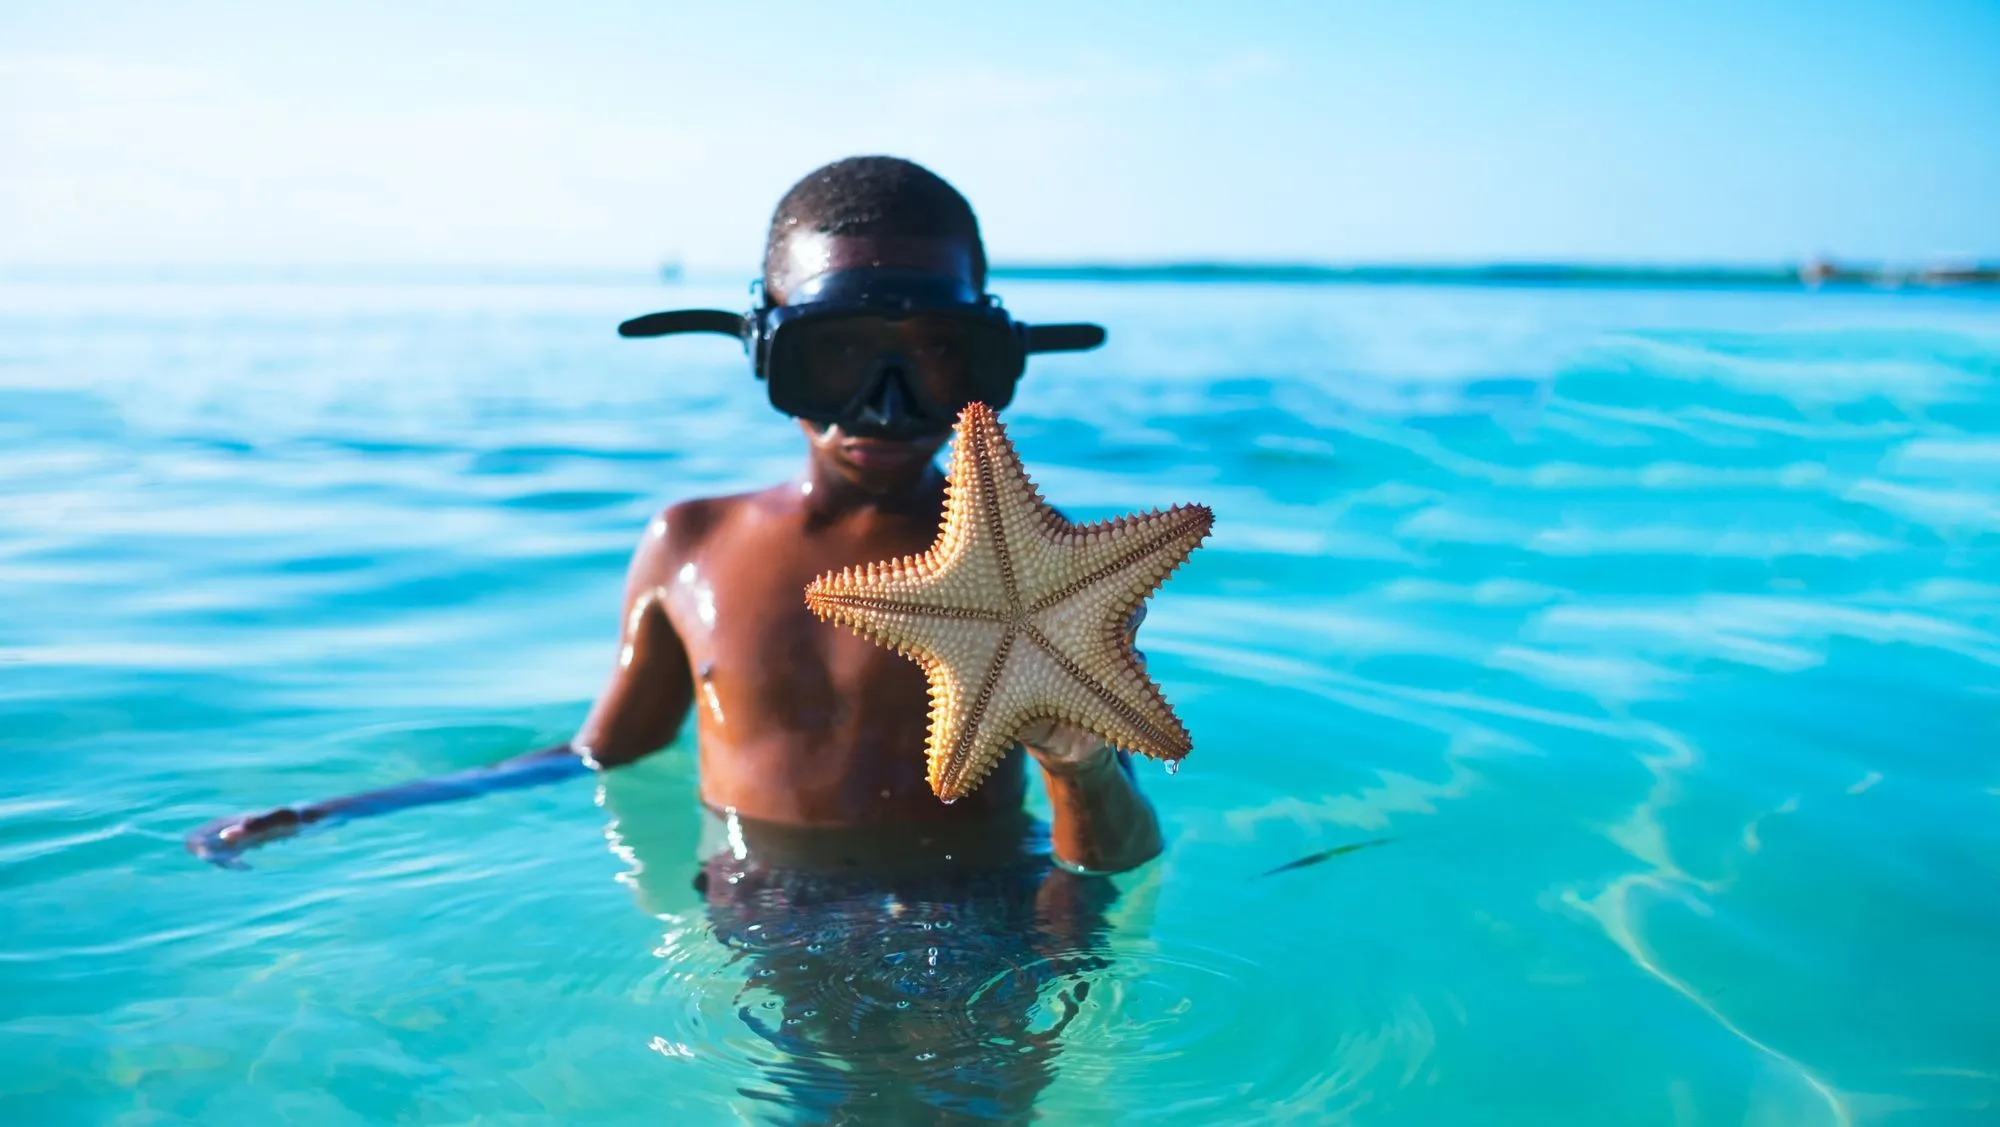 Starfish do not have any blood in them and can live as long as 35 years.